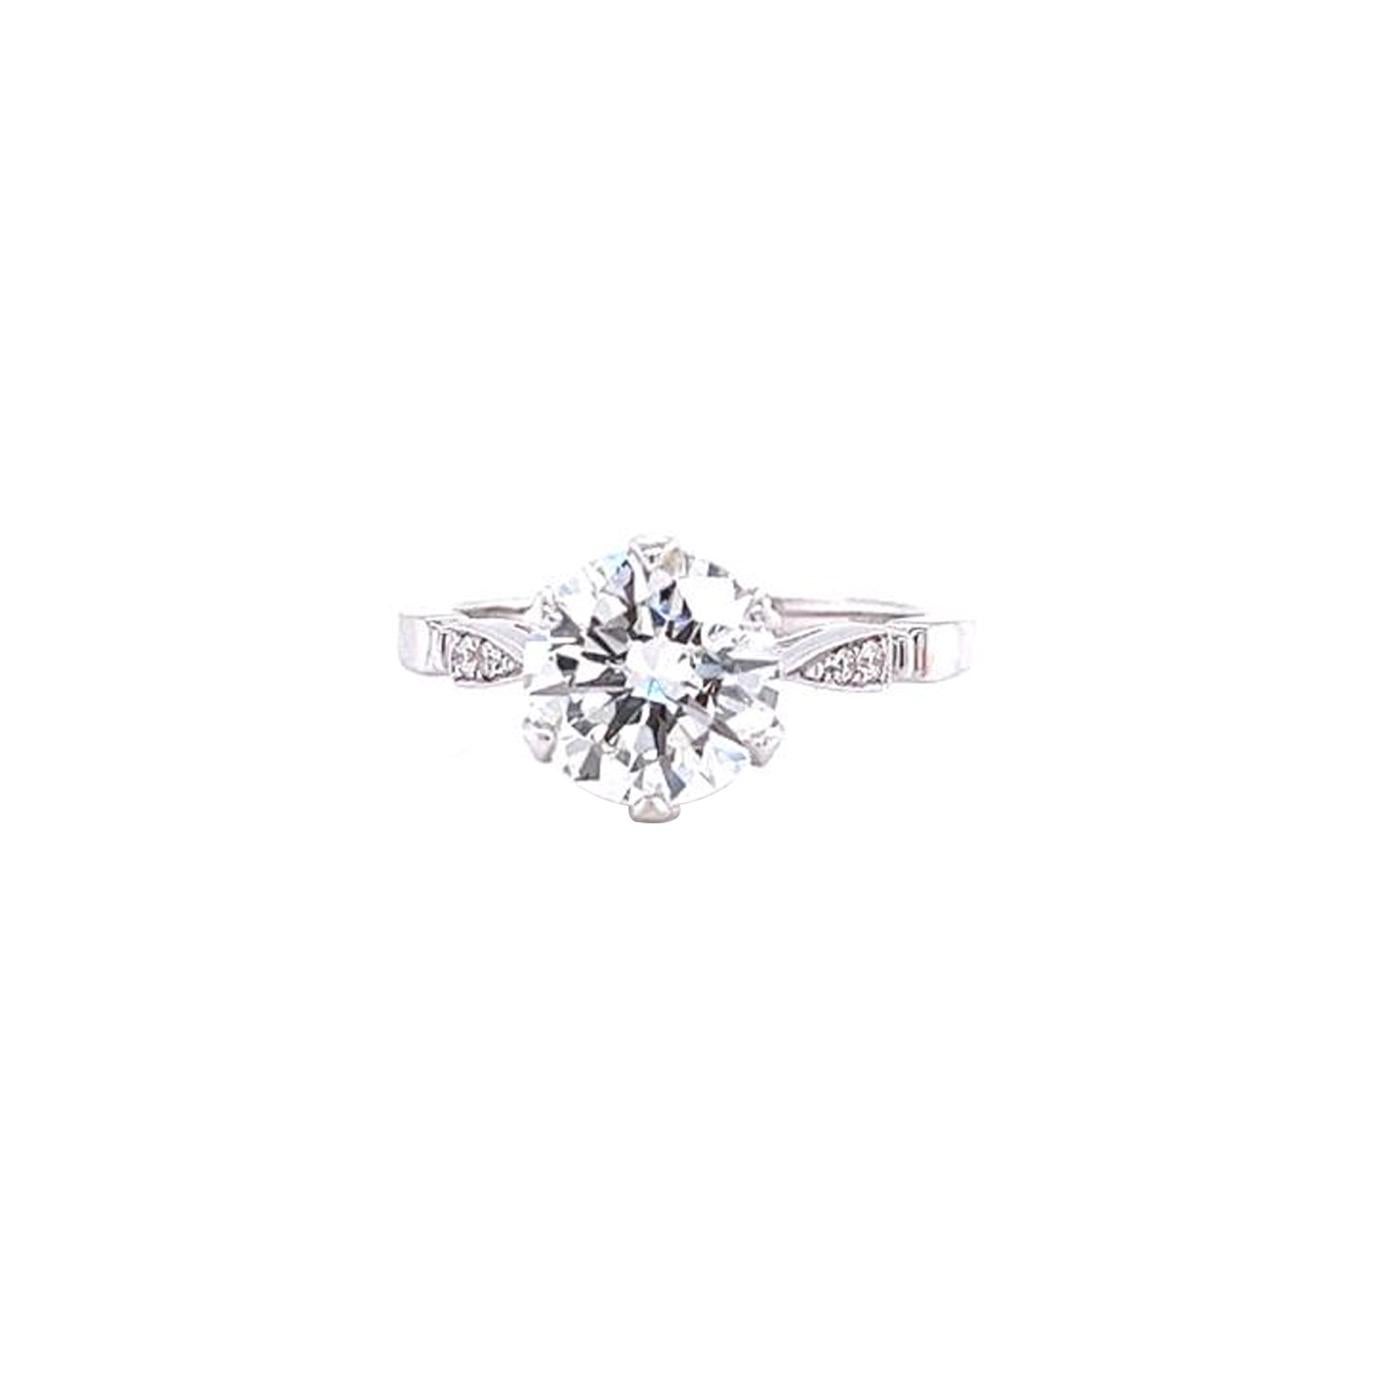 This Timeless Piece Natural Diamond Engagement Ring Features a 2.05 Carat Round Cut Diamond crafted in 18K Gold with dimensions of 7.89 - 7.96 x 5.06 mm. It has a Round Natural cut Main Stone with Pave Diamonds, a VS2 clarity grade with I Color, GIA